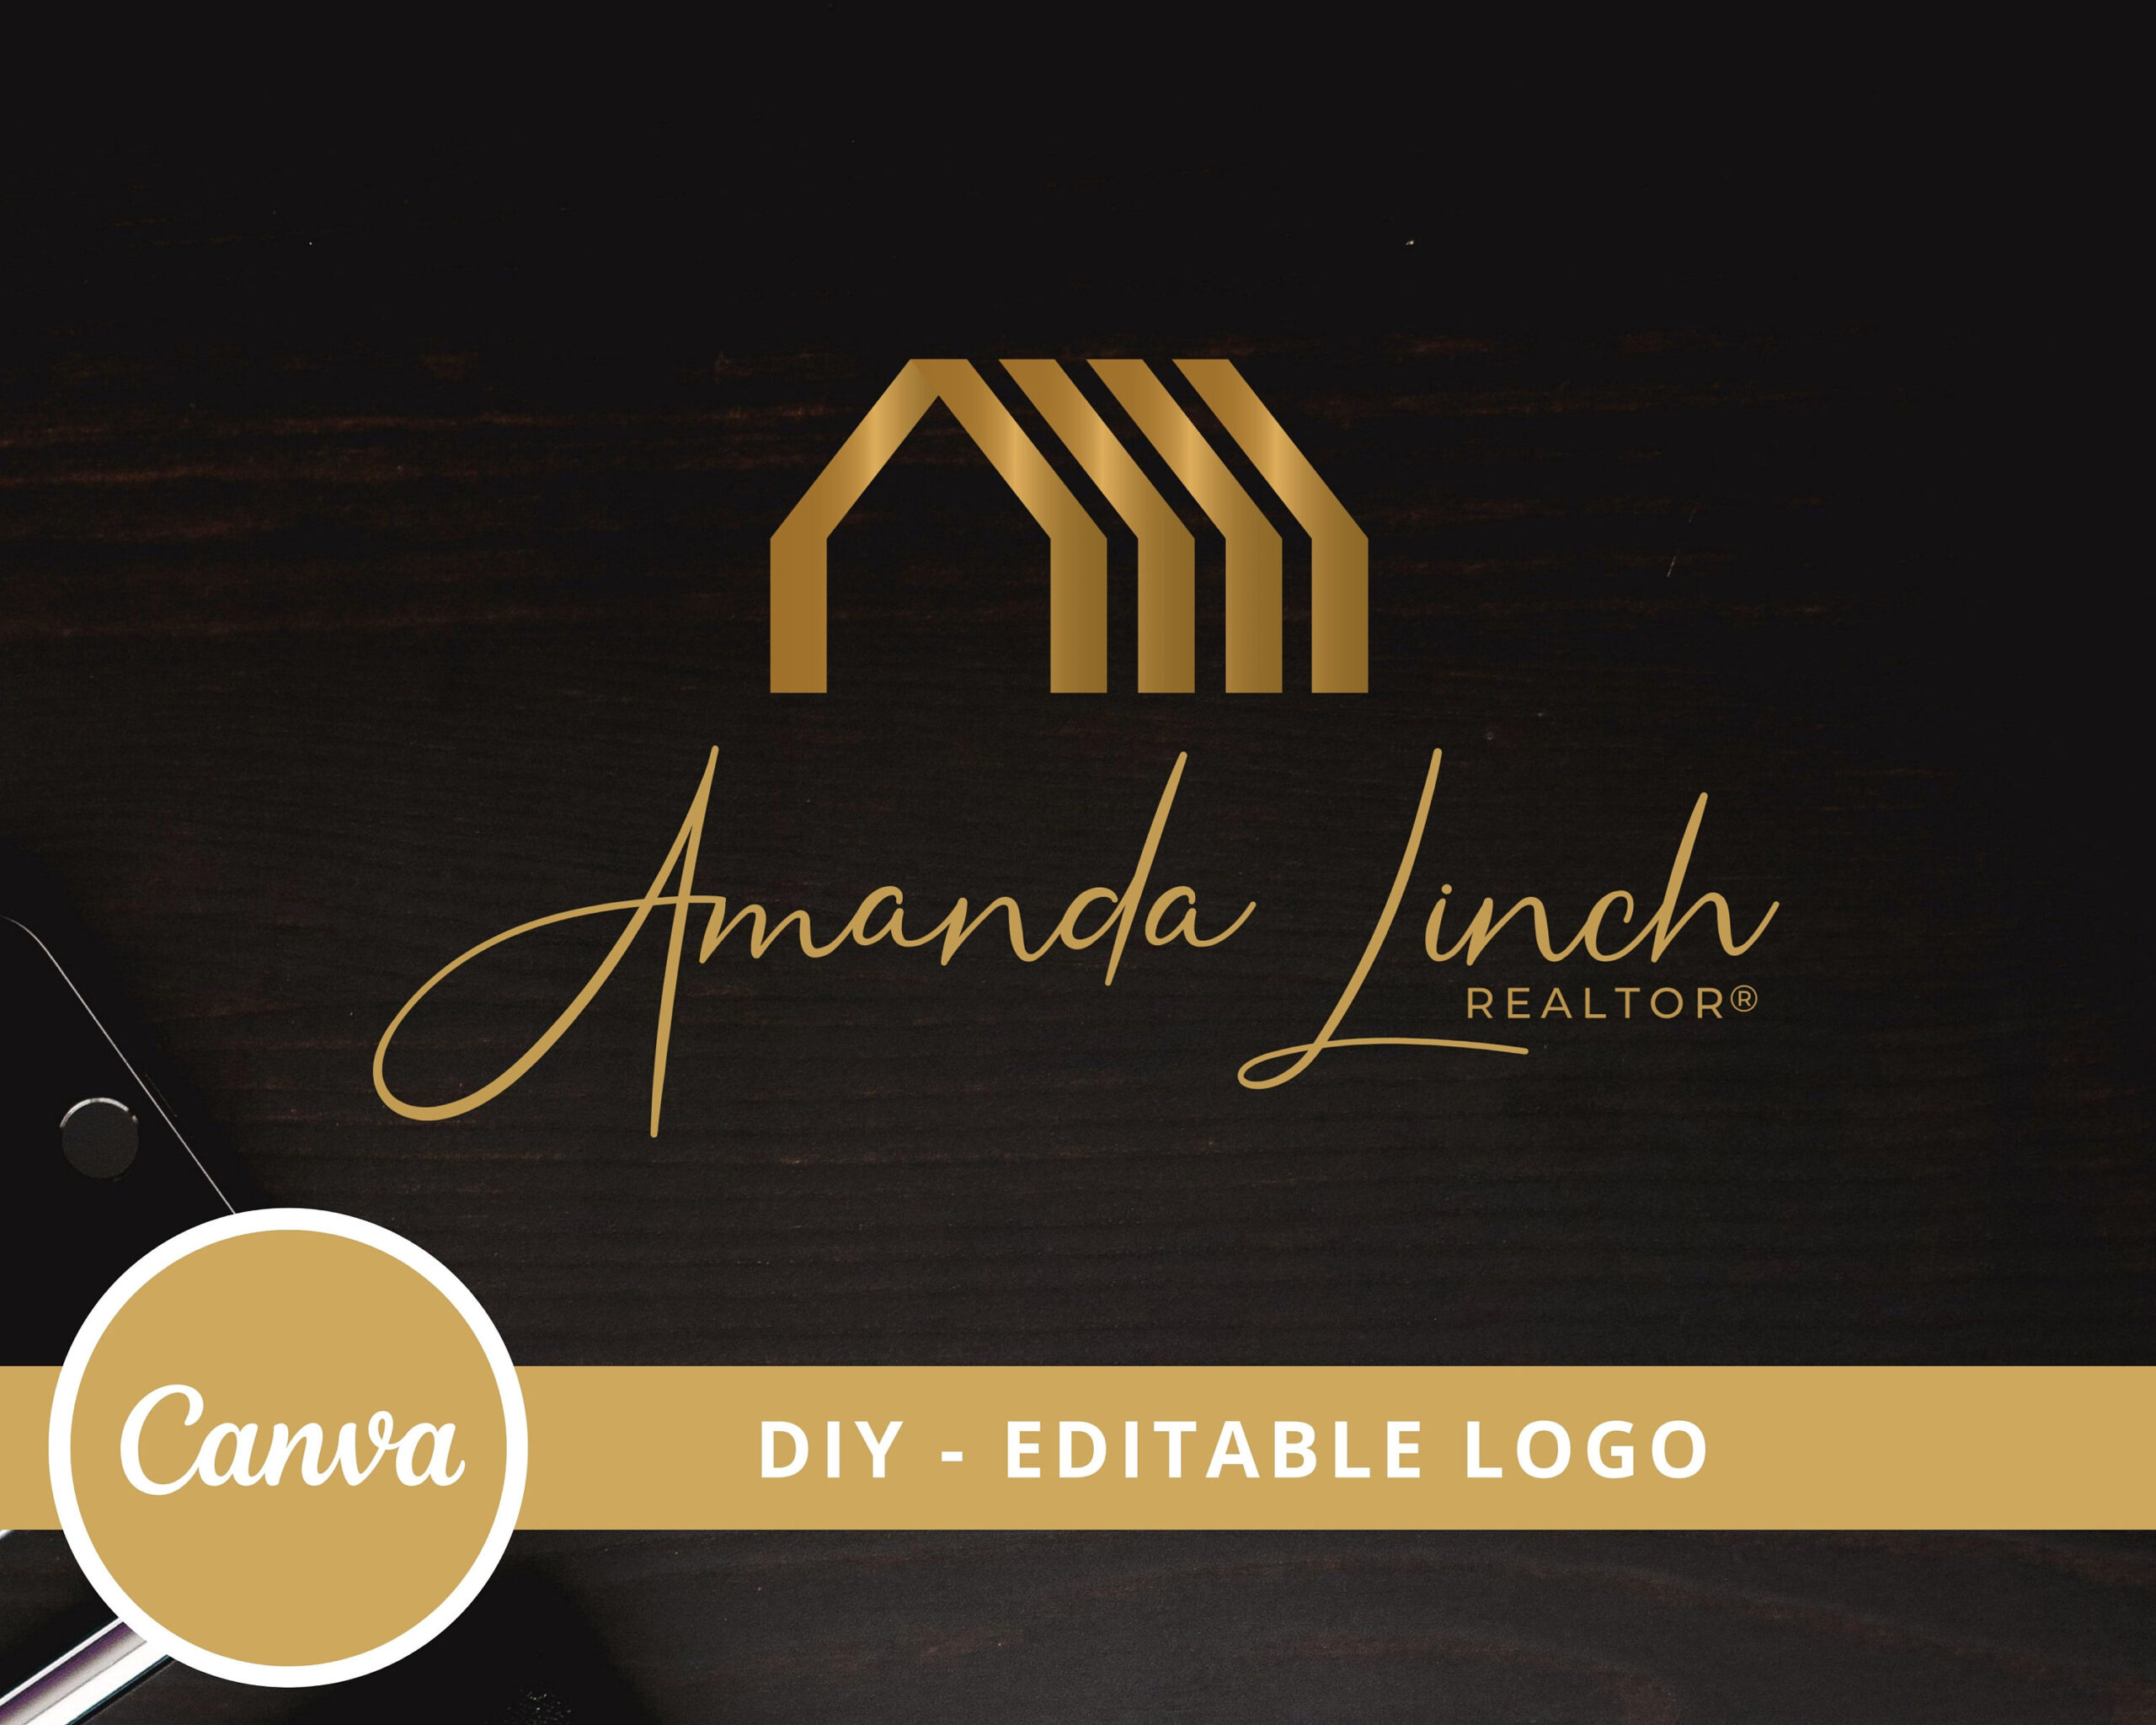 DIY Editable Logo Design for Real Estate Agents, Canva Logo Template, Signature Logo, Gold and Black, Instant Access, Edit & Download